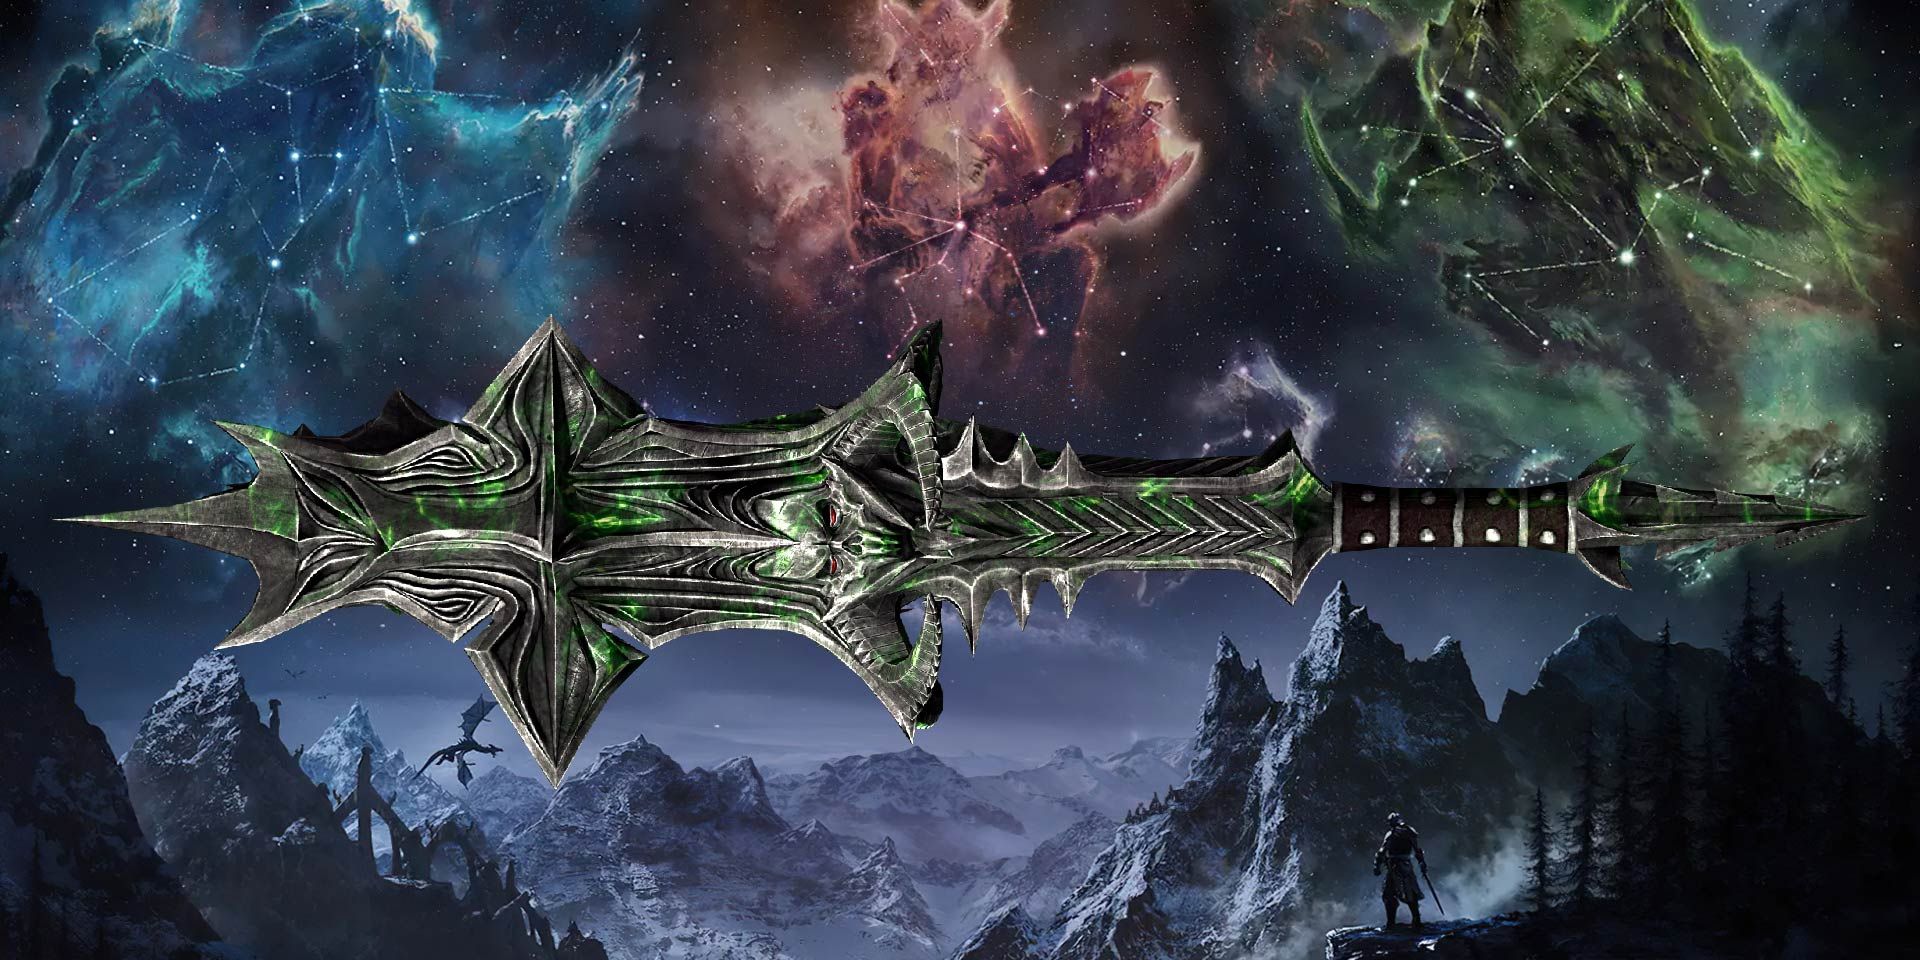 The Mace of Molag Bal among mountains and Elder Scrolls star signs.